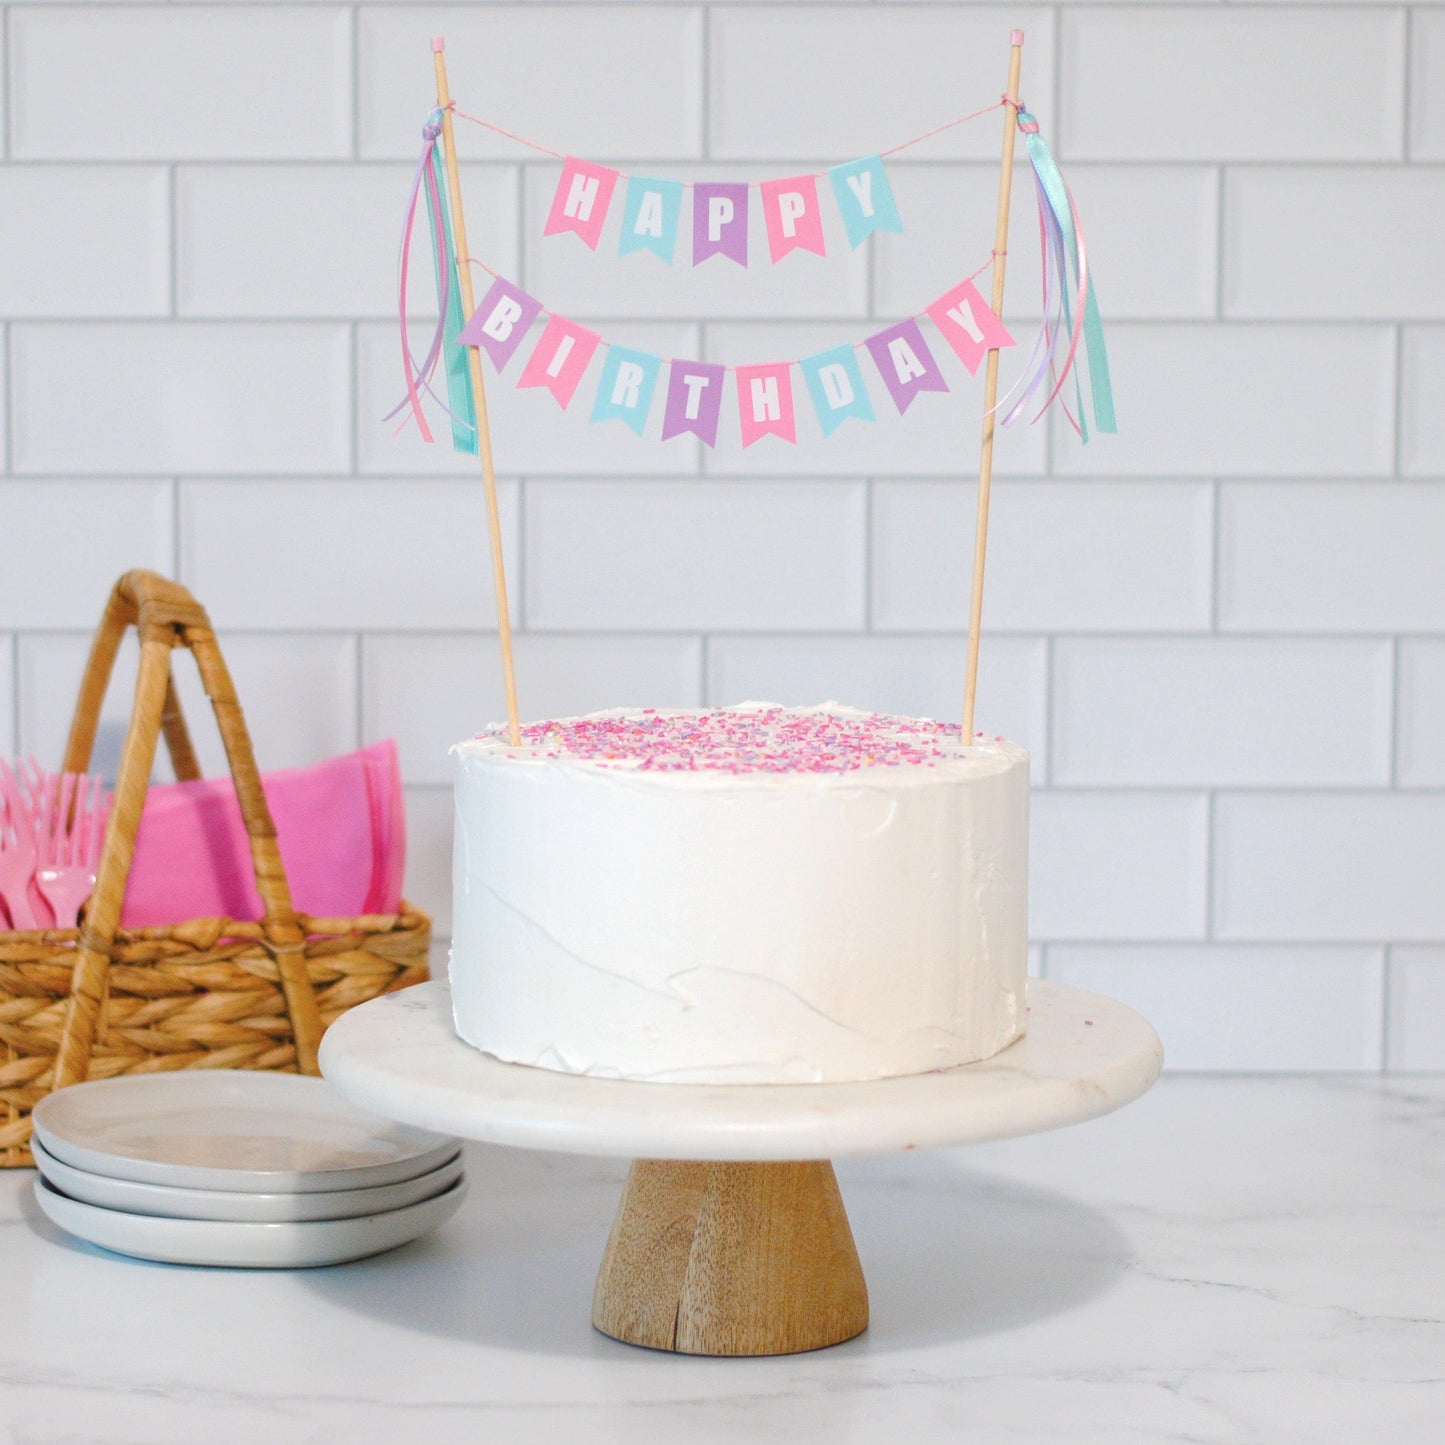 Baskin-Robbins - We know that you've been thinking about devouring our ' Cotton Candy Ice Cream Cake' a million times. 😍 Made with a crunchy  biscuit base, layered with our bestseller Cotton Candy